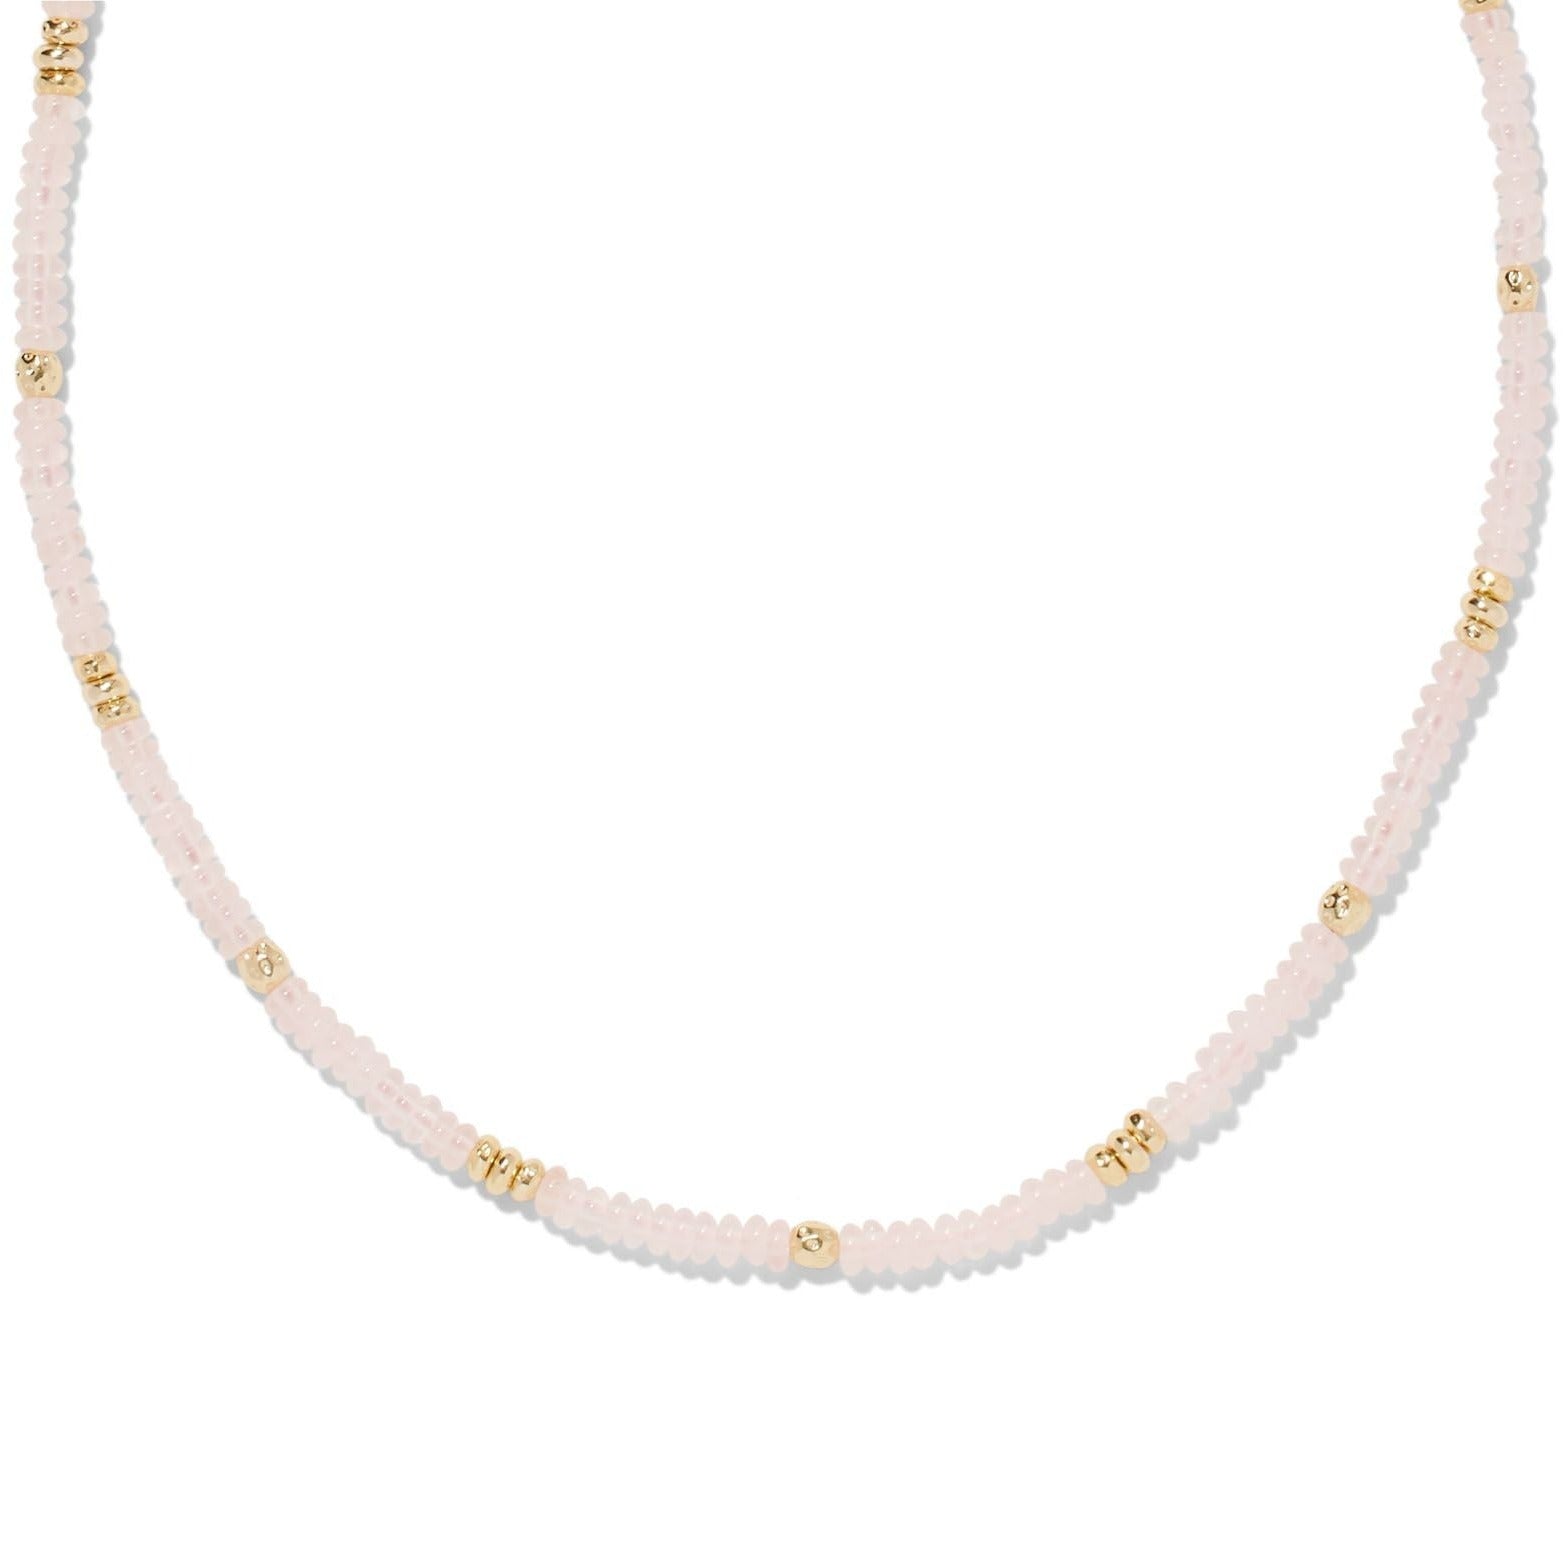 Kendra Scott | Deliah Gold Strand Necklace in Rose Quartz - Giddy Up Glamour Boutique